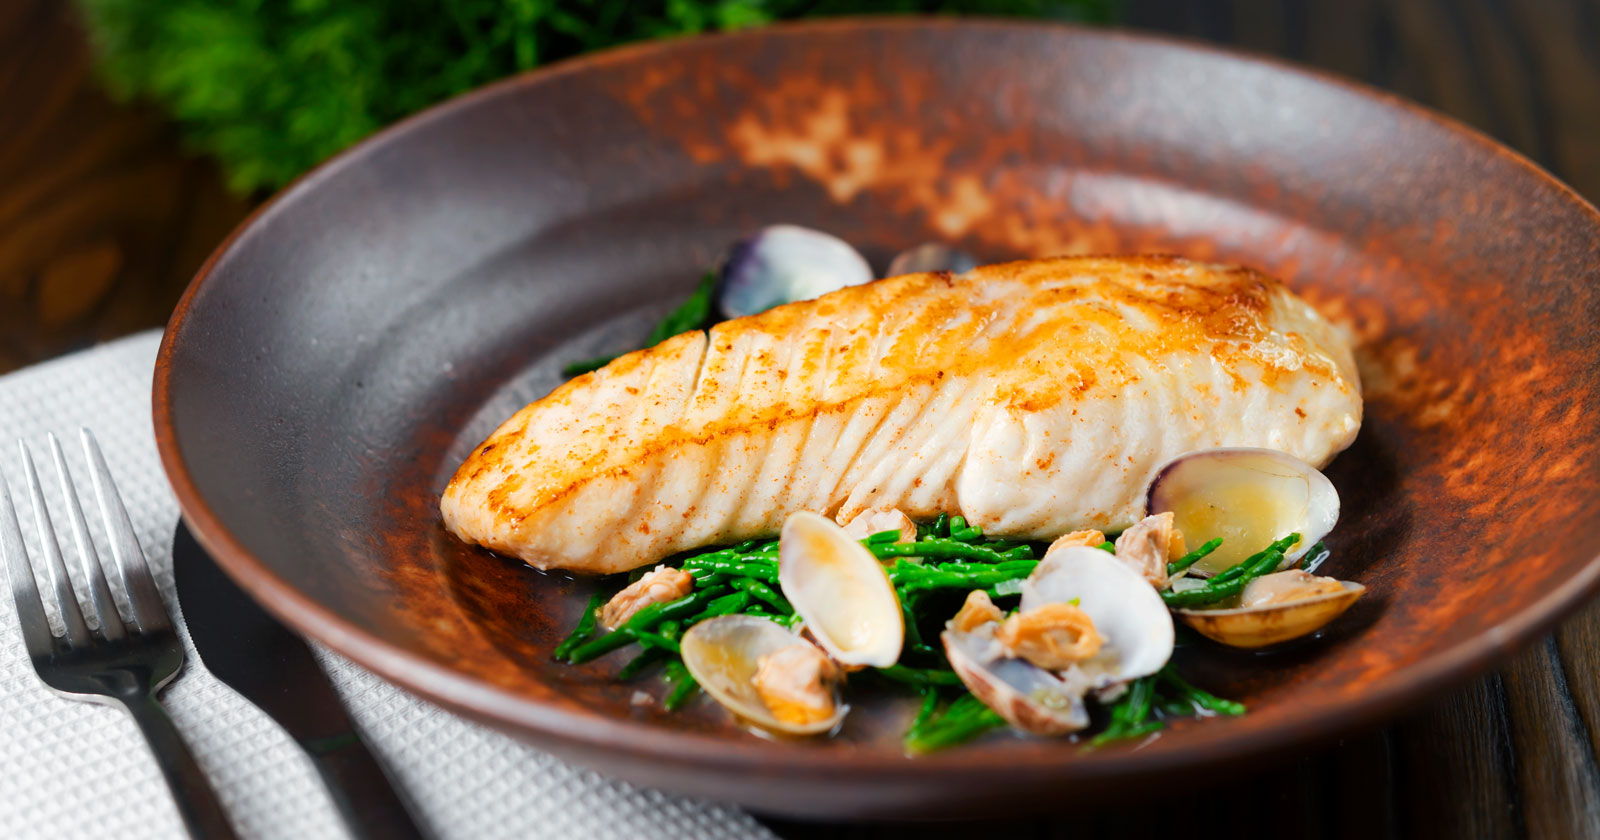 Pan Fried Halibut with Clams and Samphire